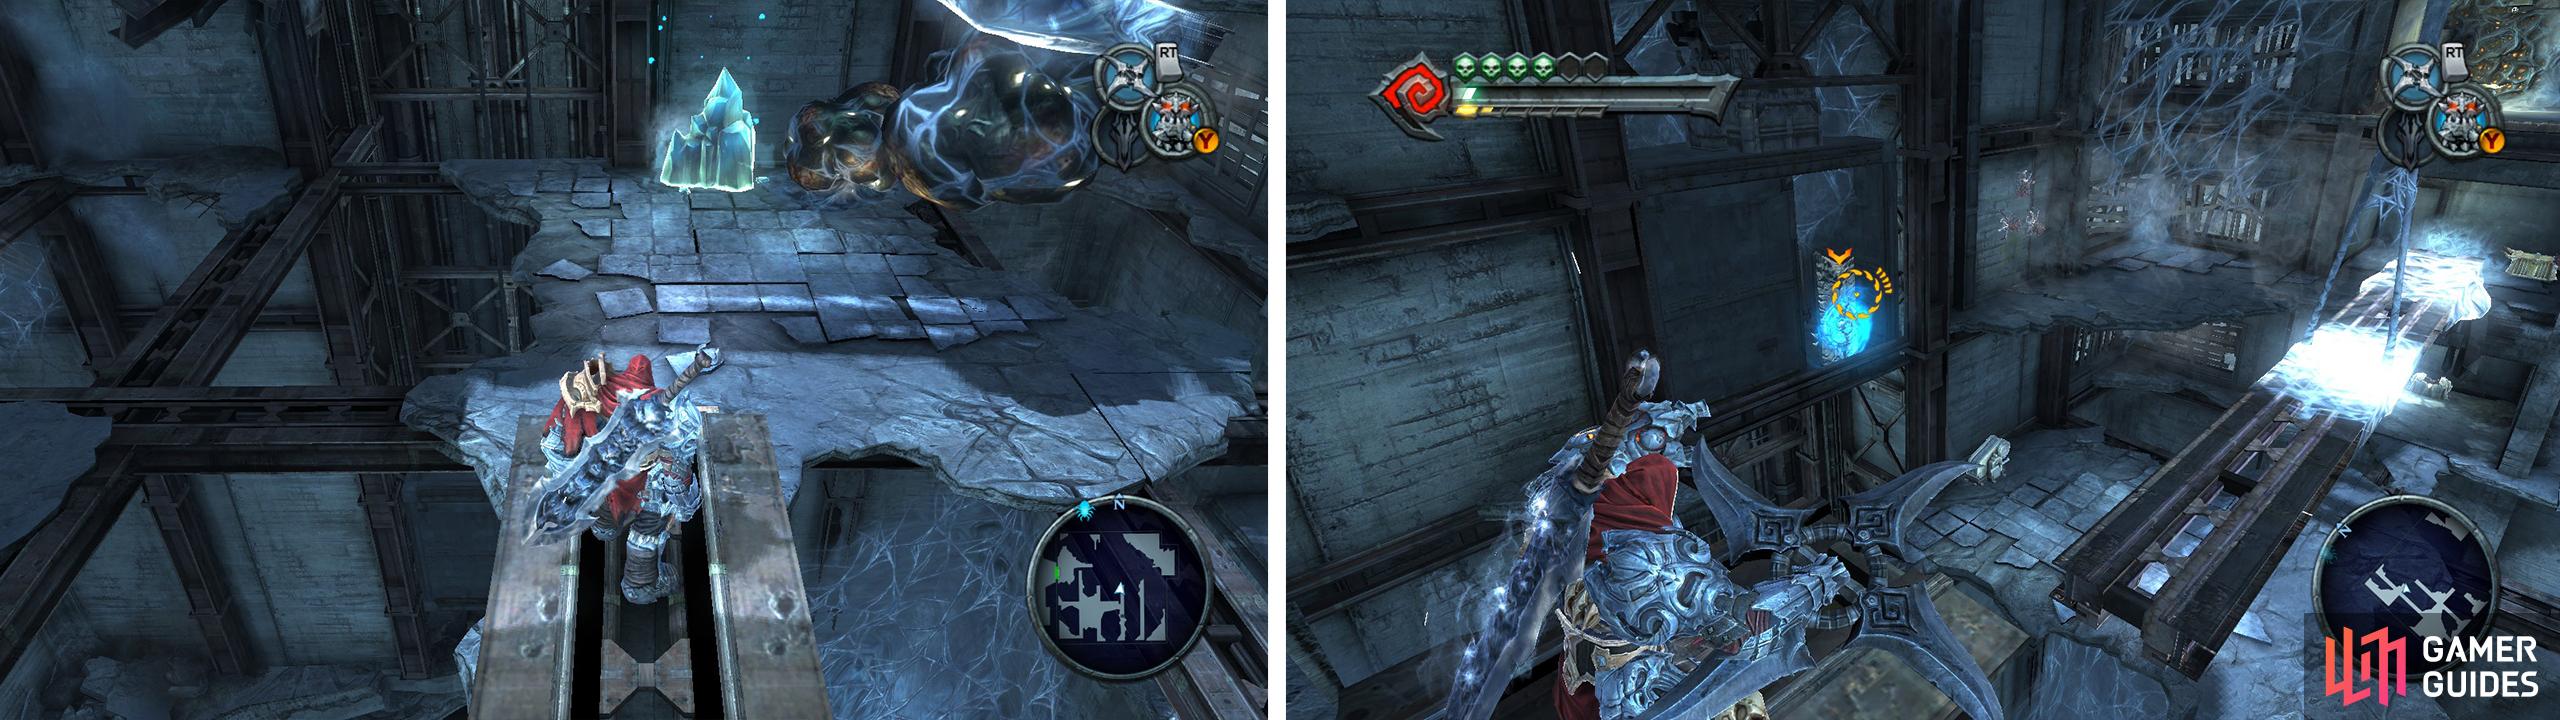 Destroy the blue crystal for a switch to activate a chronosphere (left). Manipulate the tilt on the hanging beams and the chronosphere (right) to access the chests on the far side of the room.